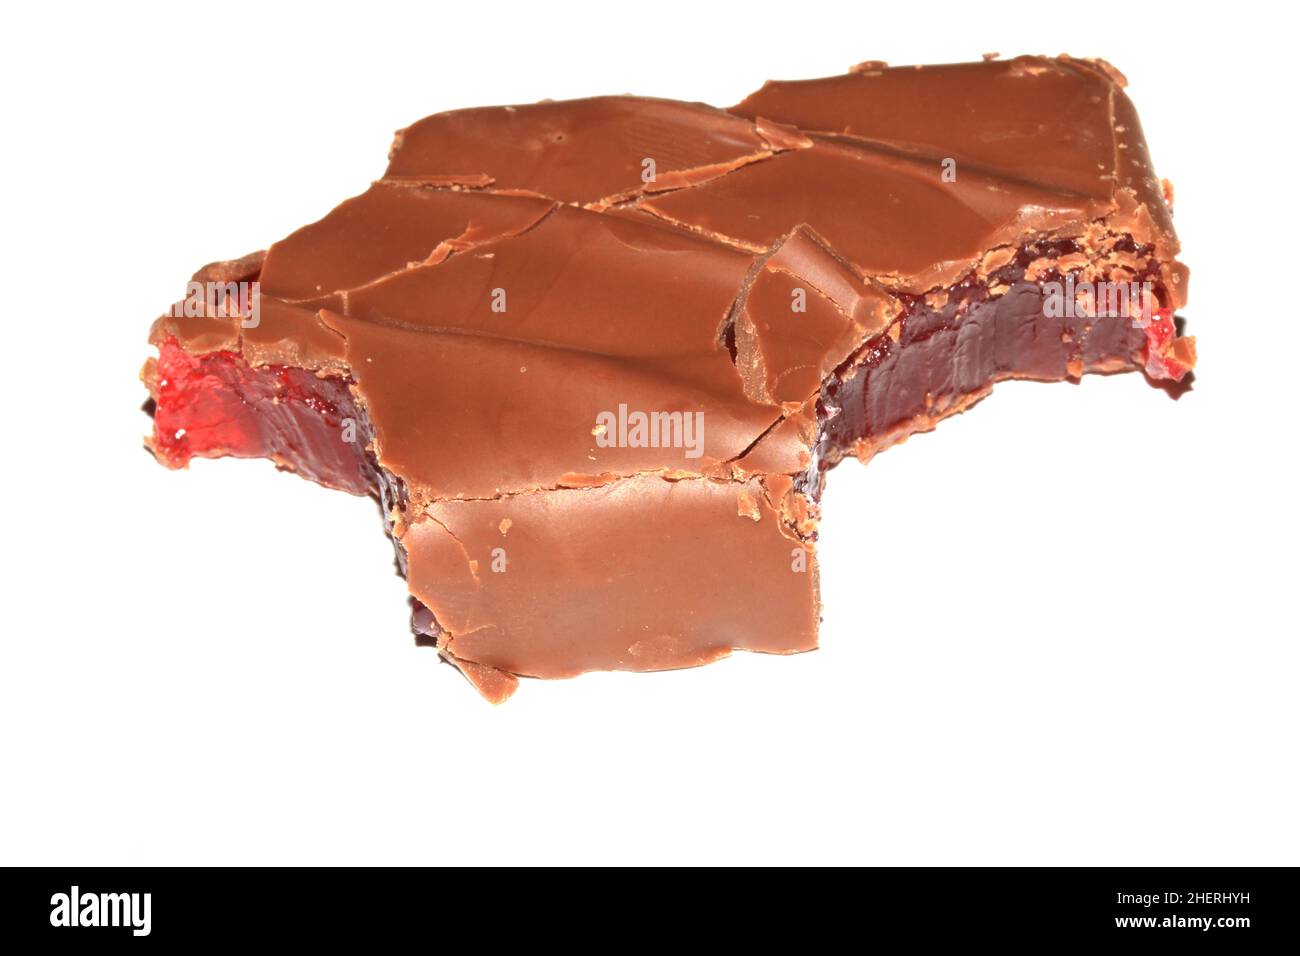 A Bitten Half Eaten Chocolate Bar with Cherry Jelly Inside on White Background Stock Photo